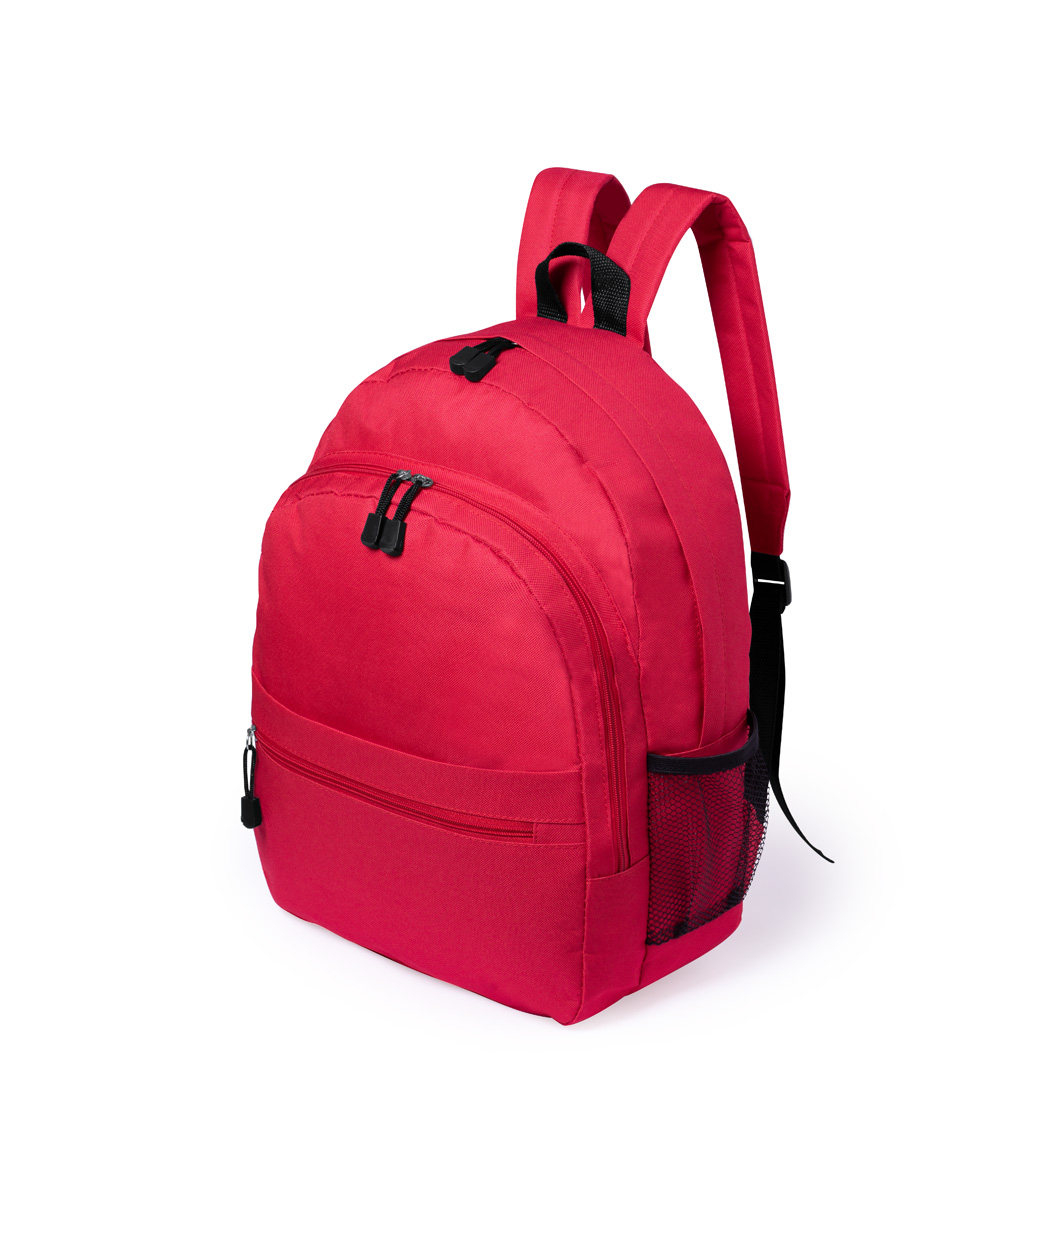 Ventix backpack - red